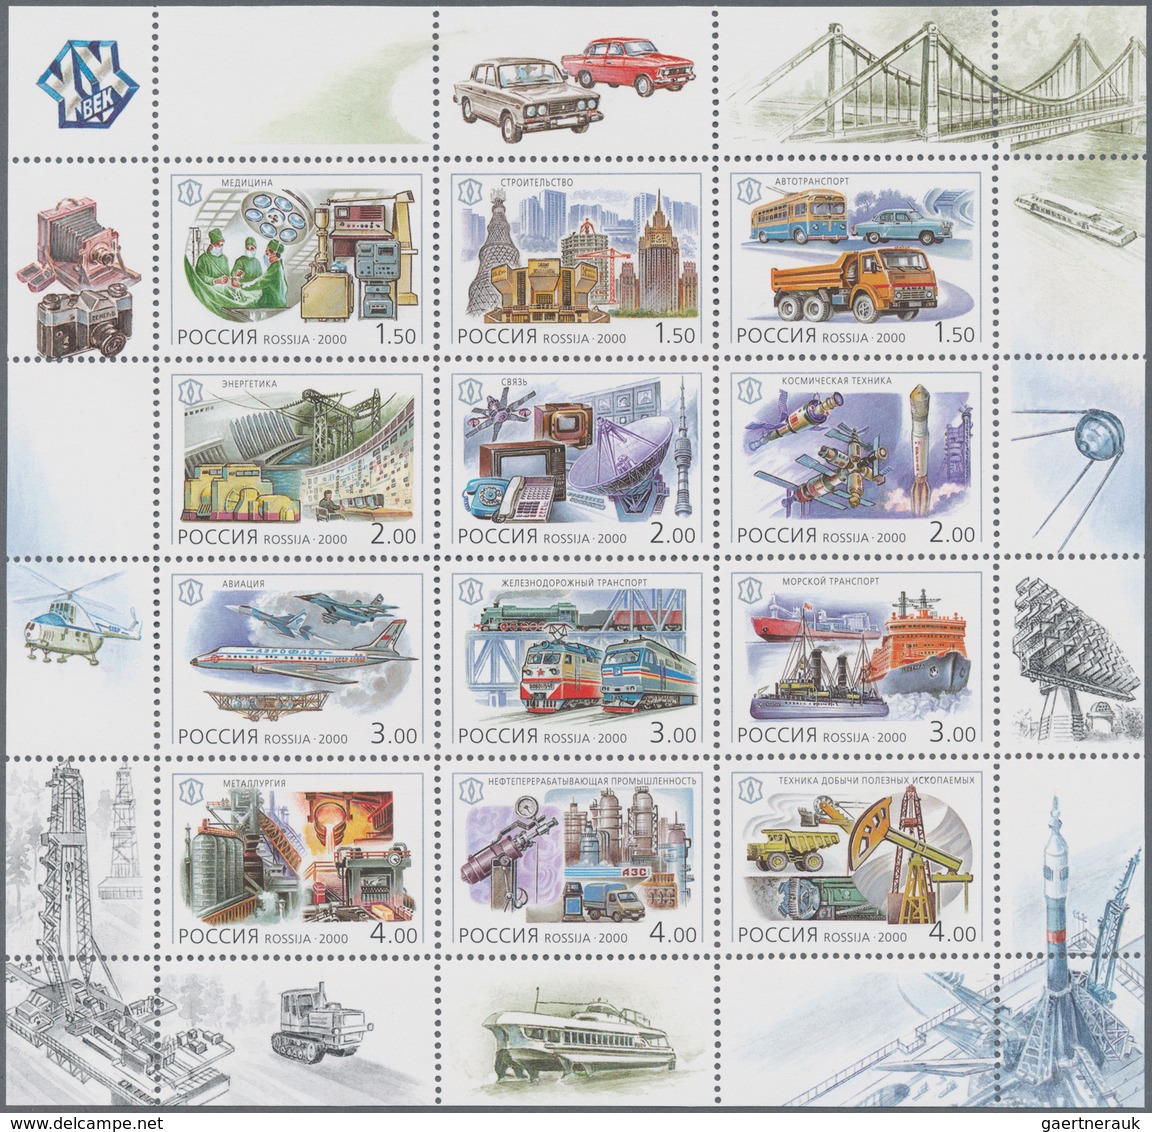 Russland: 1996/2001, collection/accumulation mint never hinged on stockcards, often in blocks of fou